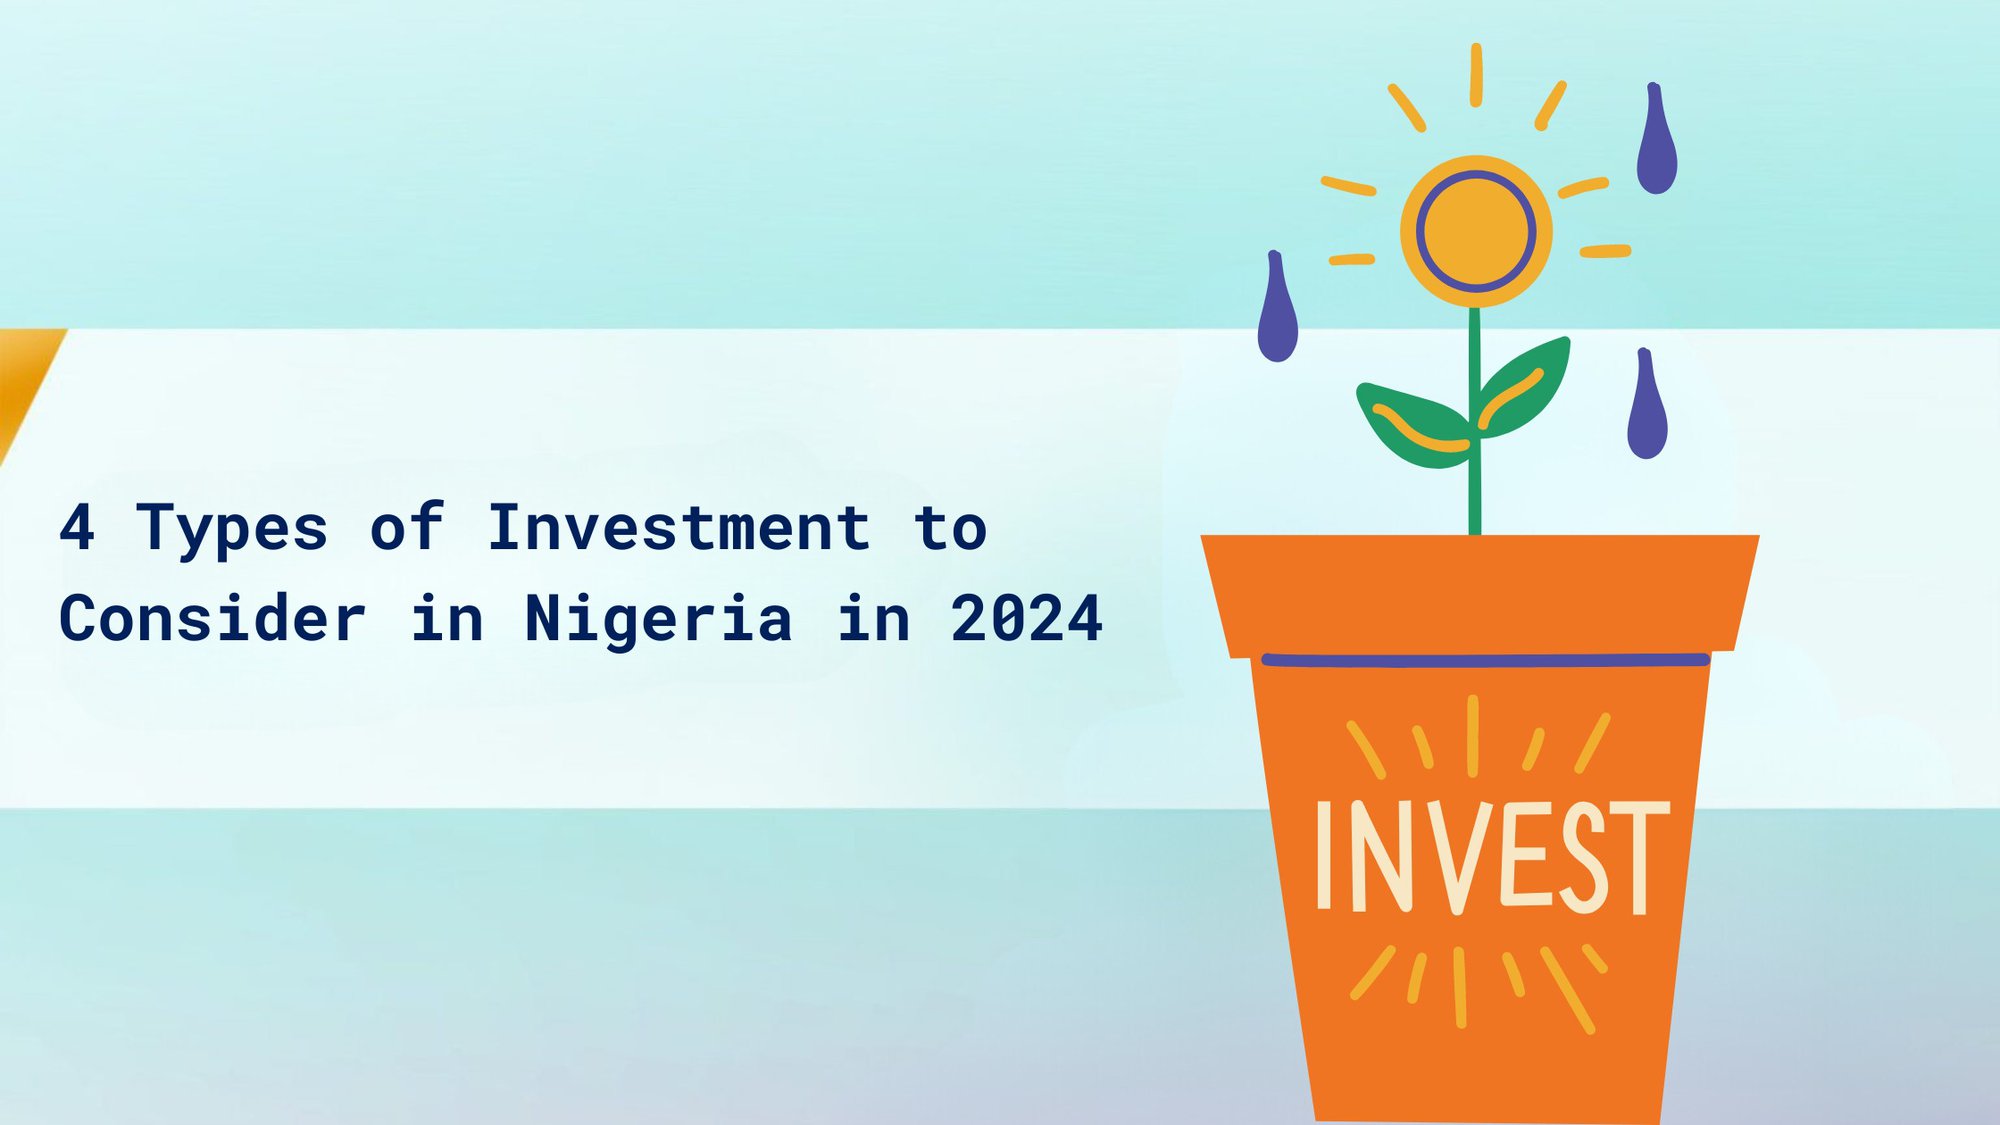 Investment to consider in Nigeria